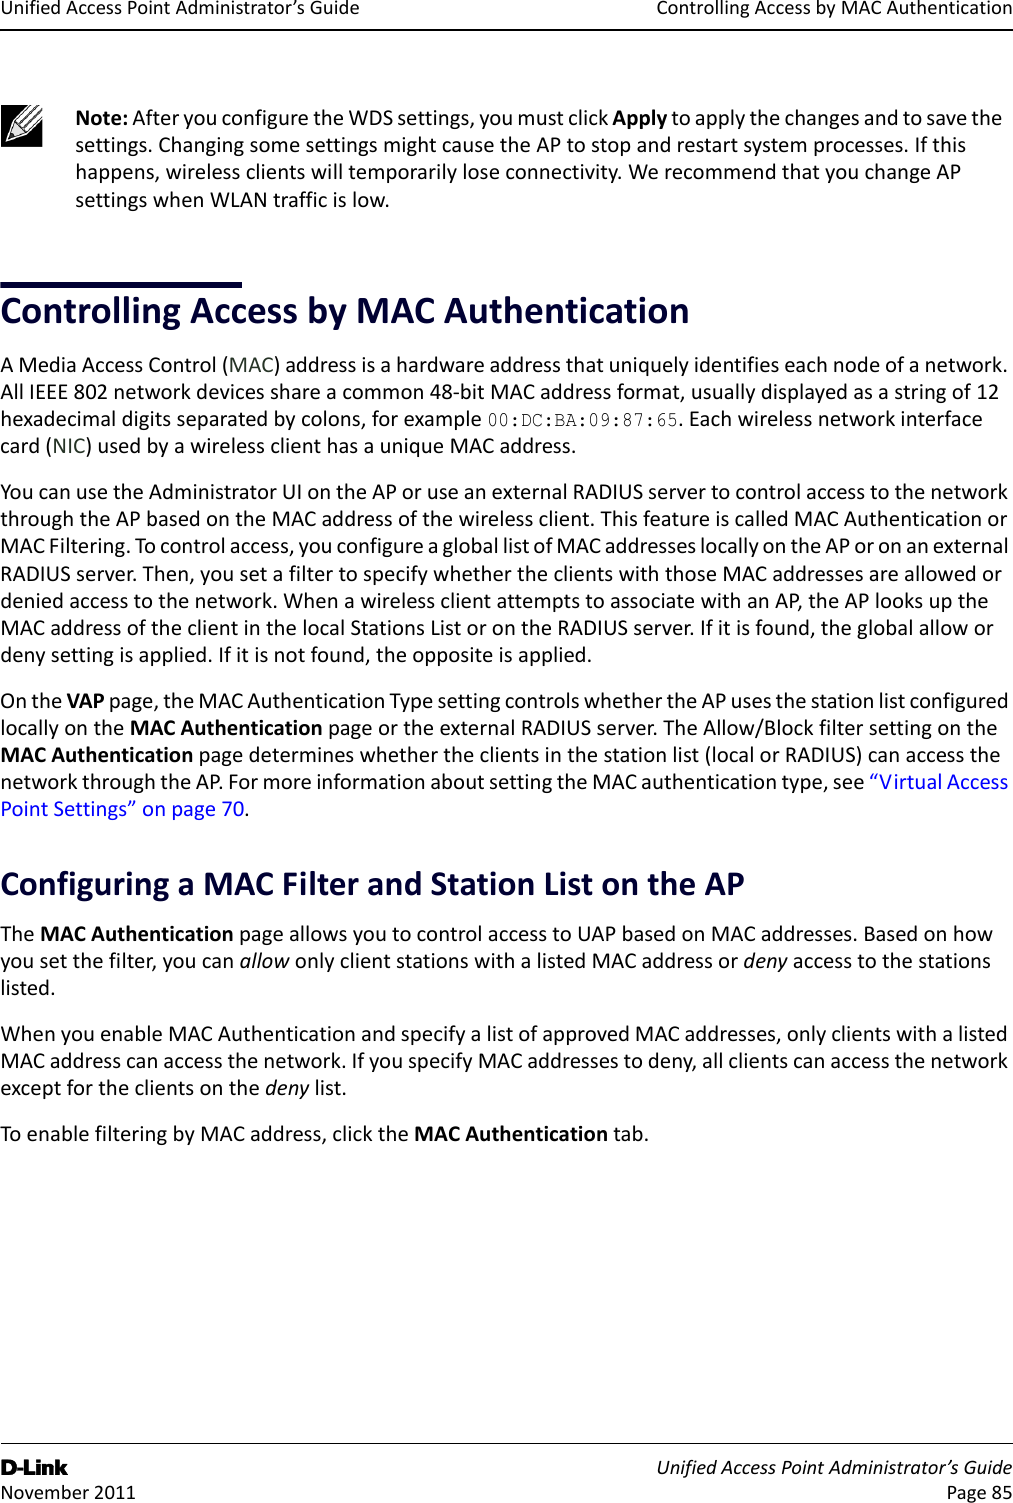 ControllingAccessbyMACAuthenticationD-Link UnifiedAccessPointAdministrator’sGuide November2011 Page85UnifiedAccessPointAdministrator’sGuideControllingAccessbyMACAuthenticationAMediaAccessControl(MAC)addressisahardwareaddressthatuniquelyidentifieseachnodeofanetwork.AllIEEE802networkdevicesshareacommon48‐bitMACaddressformat,usuallydisplayedasastringof12hexadecimaldigitsseparatedbycolons,forexample00:DC:BA:09:87:65.Eachwirelessnetworkinterfacecard(NIC)usedbyawirelessclienthasauniqueMACaddress.YoucanusetheAdministratorUIontheAPoruseanexternalRADIUSservertocontrolaccesstothenetworkthroughtheAPbasedontheMACaddressofthewirelessclient.ThisfeatureiscalledMACAuthenticationorMACFiltering.Tocontrolaccess,youconfigureagloballistofMACaddresseslocallyontheAPoronanexternalRADIUSserver.Then,yousetafiltertospecifywhethertheclientswiththoseMACaddressesareallowedordeniedaccesstothenetwork.WhenawirelessclientattemptstoassociatewithanAP,theAPlooksuptheMACaddressoftheclientinthelocalStationsListorontheRADIUSserver.Ifitisfound,theglobalallowordenysettingisapplied.Ifitisnotfound,theoppositeisapplied.OntheVAPpage,theMACAuthenticationTypesettingcontrolswhethertheAPusesthestationlistconfiguredlocallyontheMACAuthenticationpageortheexternalRADIUSserver.TheAllow/BlockfiltersettingontheMACAuthenticationpagedetermineswhethertheclientsinthestationlist(localorRADIUS)canaccessthenetworkthroughtheAP.FormoreinformationaboutsettingtheMACauthenticationtype,see“VirtualAccessPointSettings”onpage70.ConfiguringaMACFilterandStationListontheAPTheMACAuthenticationpageallowsyoutocontrolaccesstoUAPbasedonMACaddresses.Basedonhowyousetthefilter,youcanallowonlyclientstationswithalistedMACaddressordenyaccesstothestationslisted.WhenyouenableMACAuthenticationandspecifyalistofapprovedMACaddresses,onlyclientswithalistedMACaddresscanaccessthenetwork.IfyouspecifyMACaddressestodeny,allclientscanaccessthenetworkexceptfortheclientsonthedenylist.ToenablefilteringbyMACaddress,clicktheMACAuthenticationtab.Note:AfteryouconfiguretheWDSsettings,youmustclickApplytoapplythechangesandtosavethesettings.ChangingsomesettingsmightcausetheAPtostopandrestartsystemprocesses.Ifthishappens,wirelessclientswilltemporarilyloseconnectivity.WerecommendthatyouchangeAPsettingswhenWLANtrafficislow.